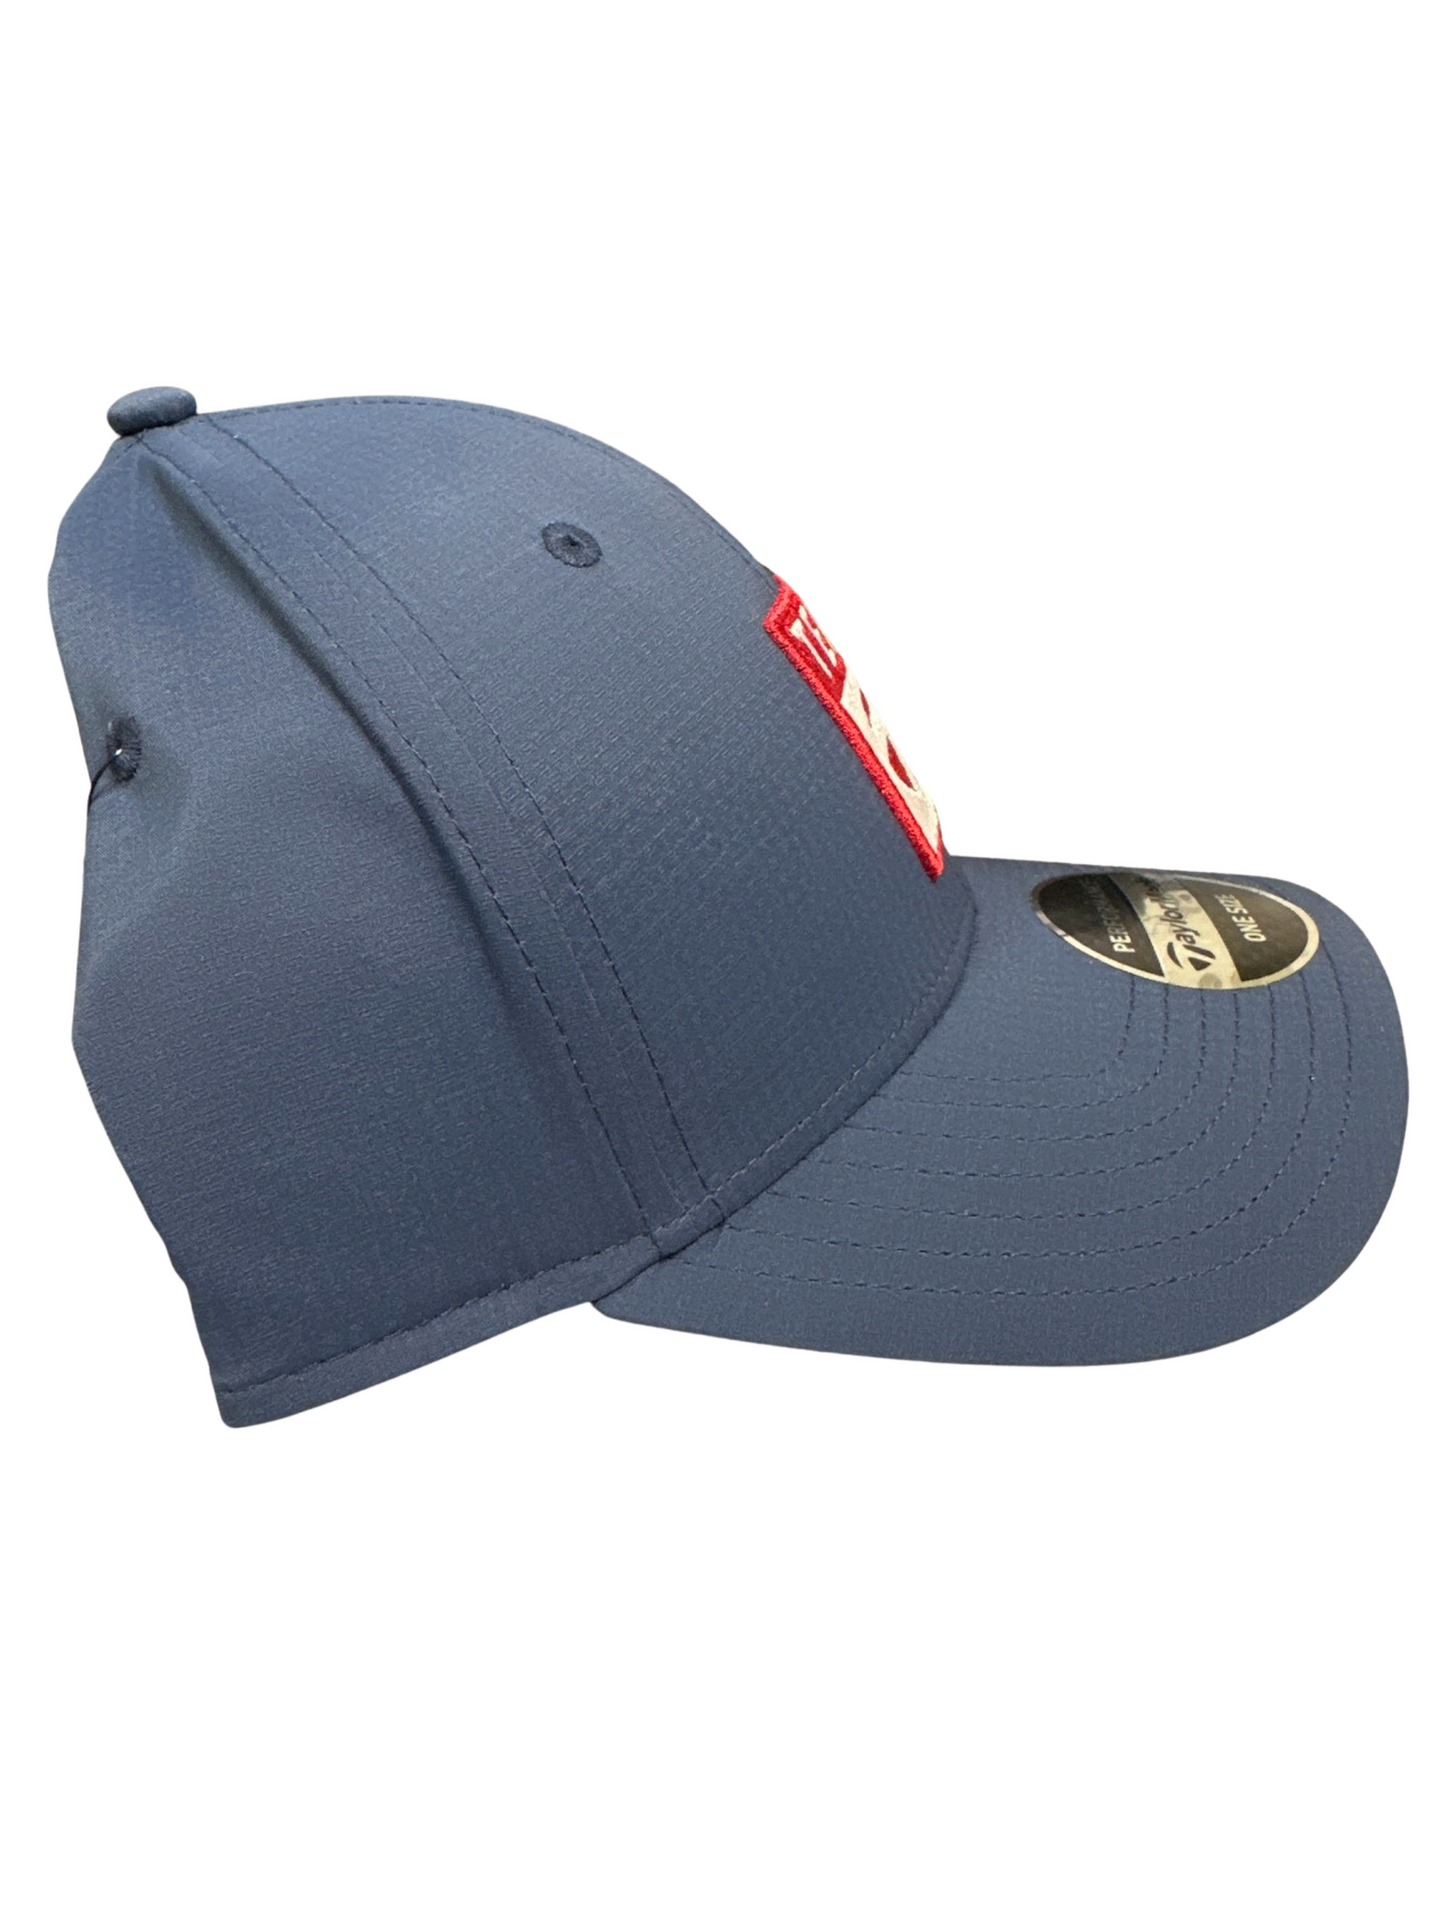 Taylormade Golf Hat - Blue